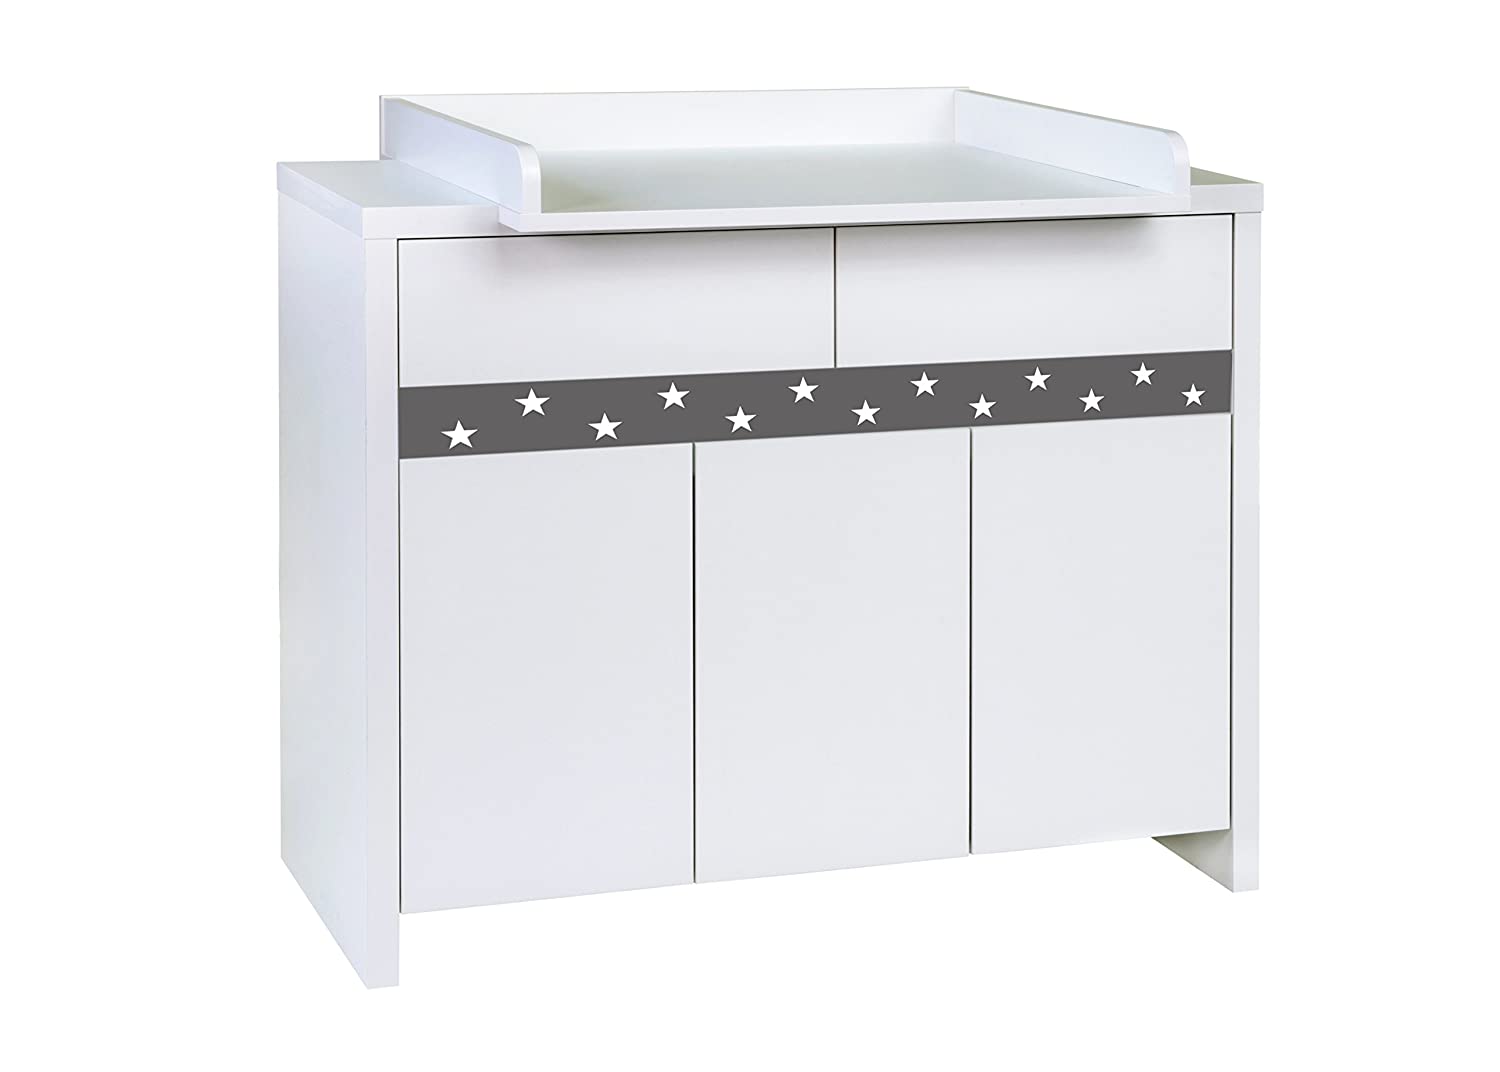 Schardt 05 900 02 66 Planet Star Changing Table with Nappy Changing Table, White